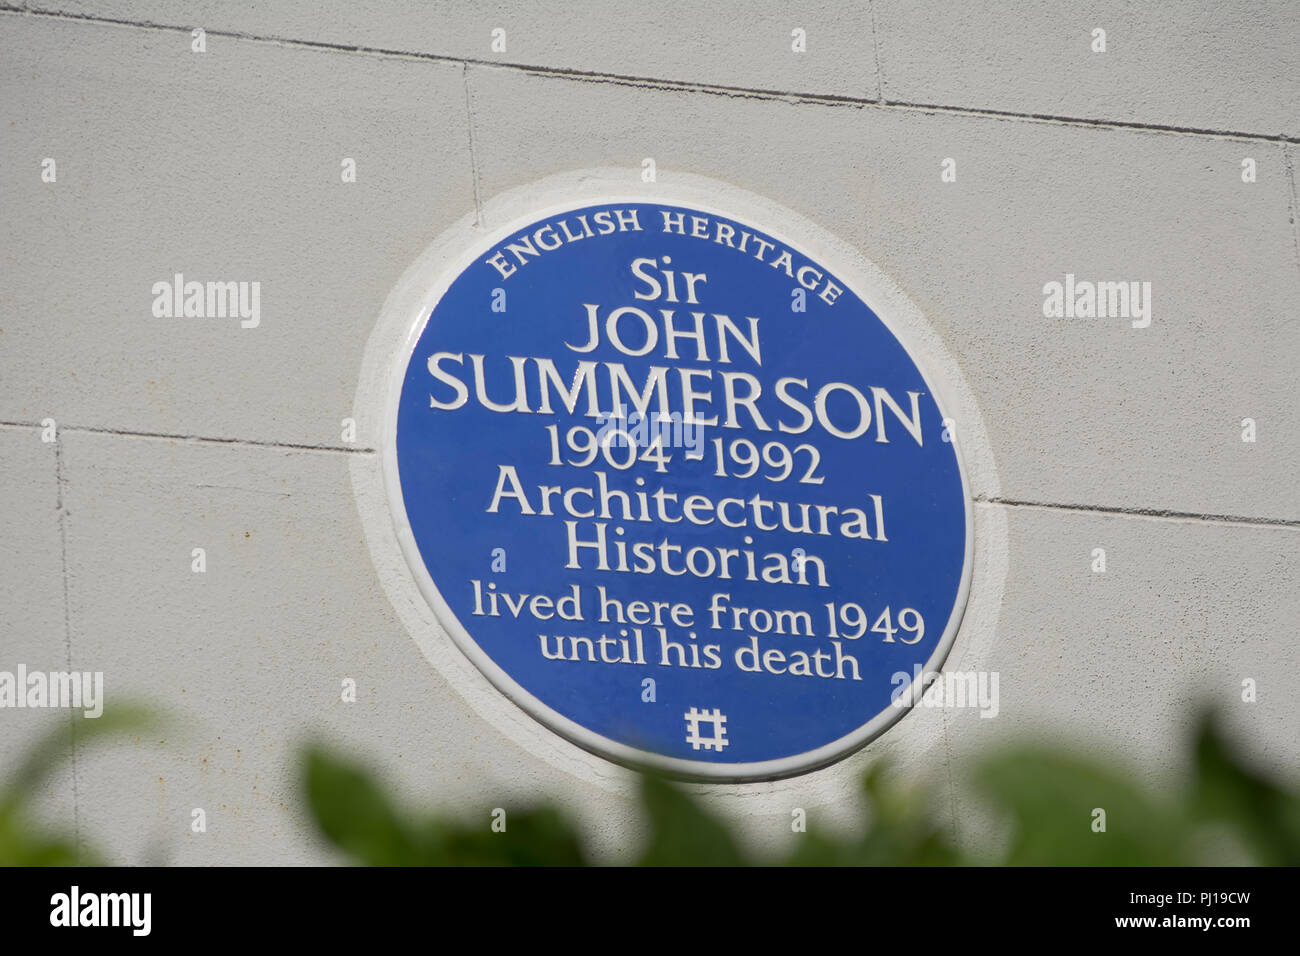 english heritage blue plaque marking a home of architectural historian sir john summerson, hampstead, london, england Stock Photo